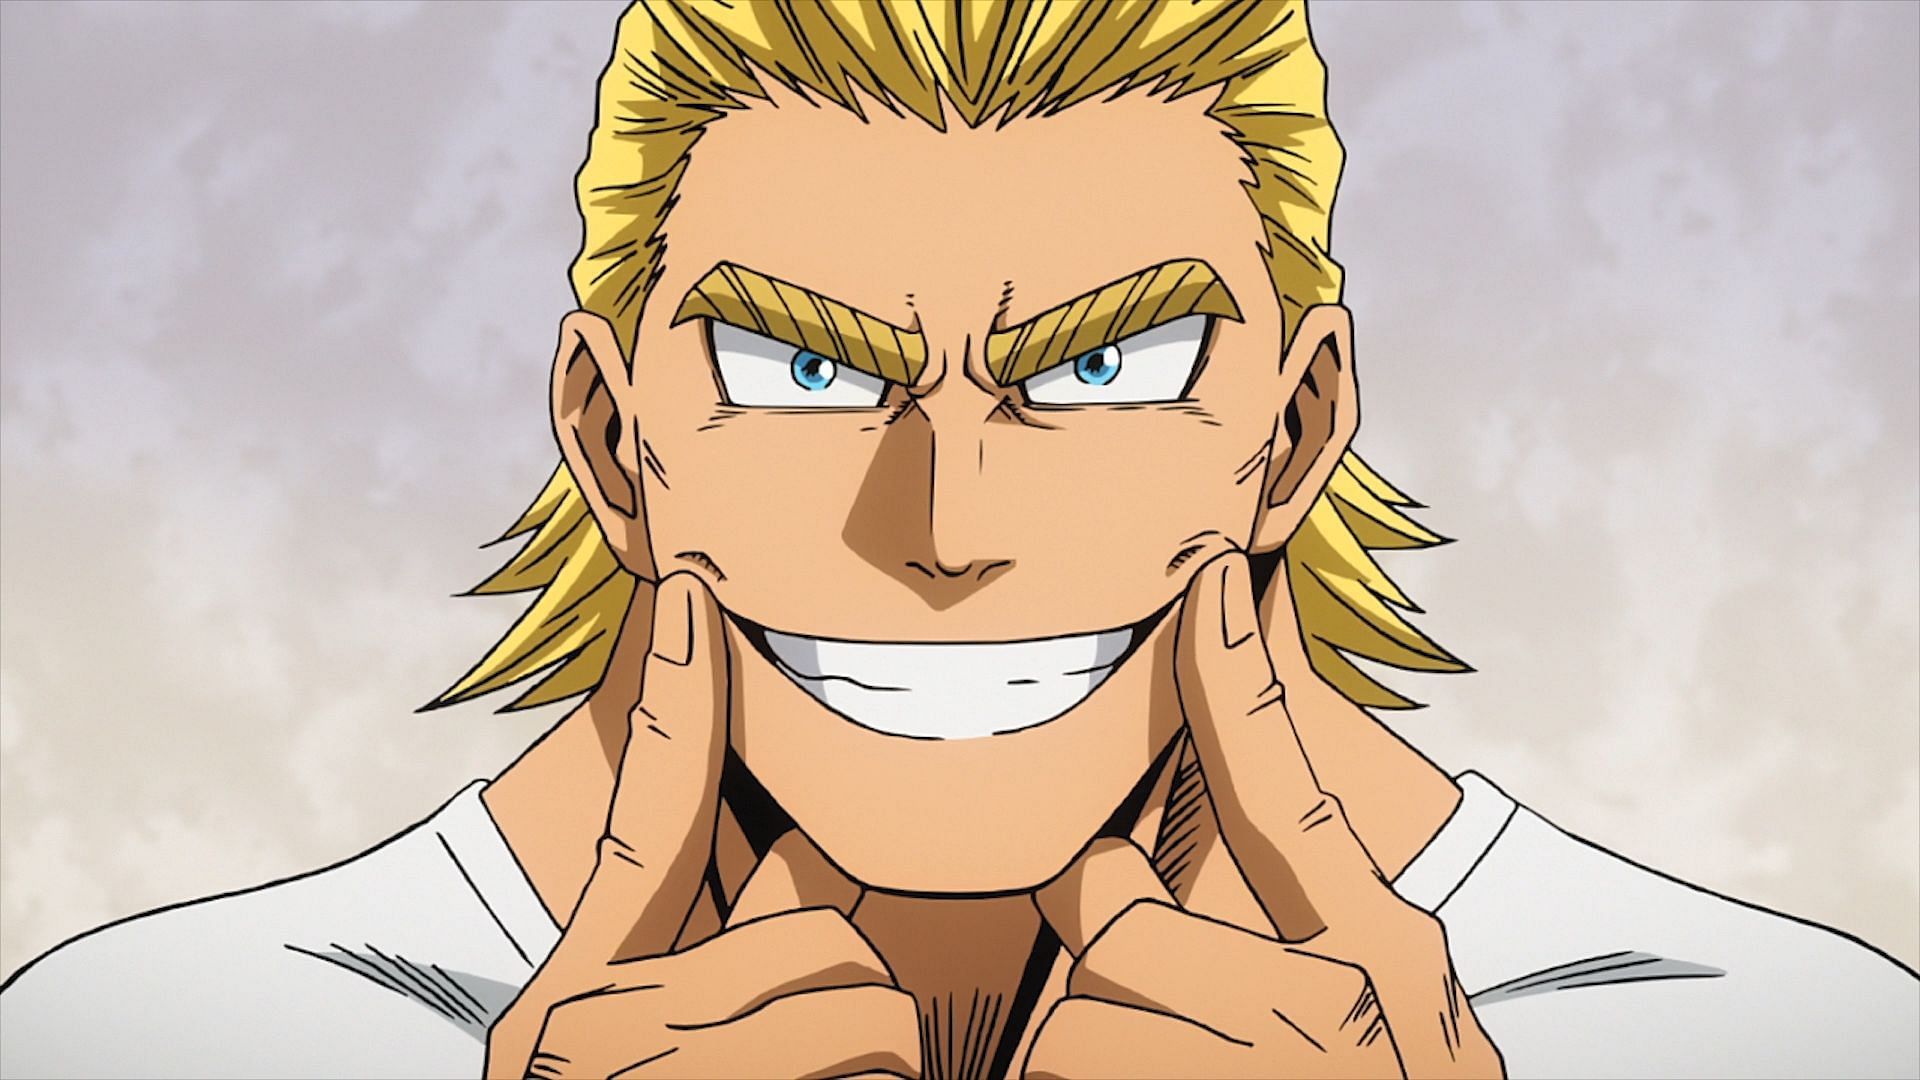 All Might Rising canonly takes place much earlier, but would contain some spoilers if watched too early (Image via Bones)